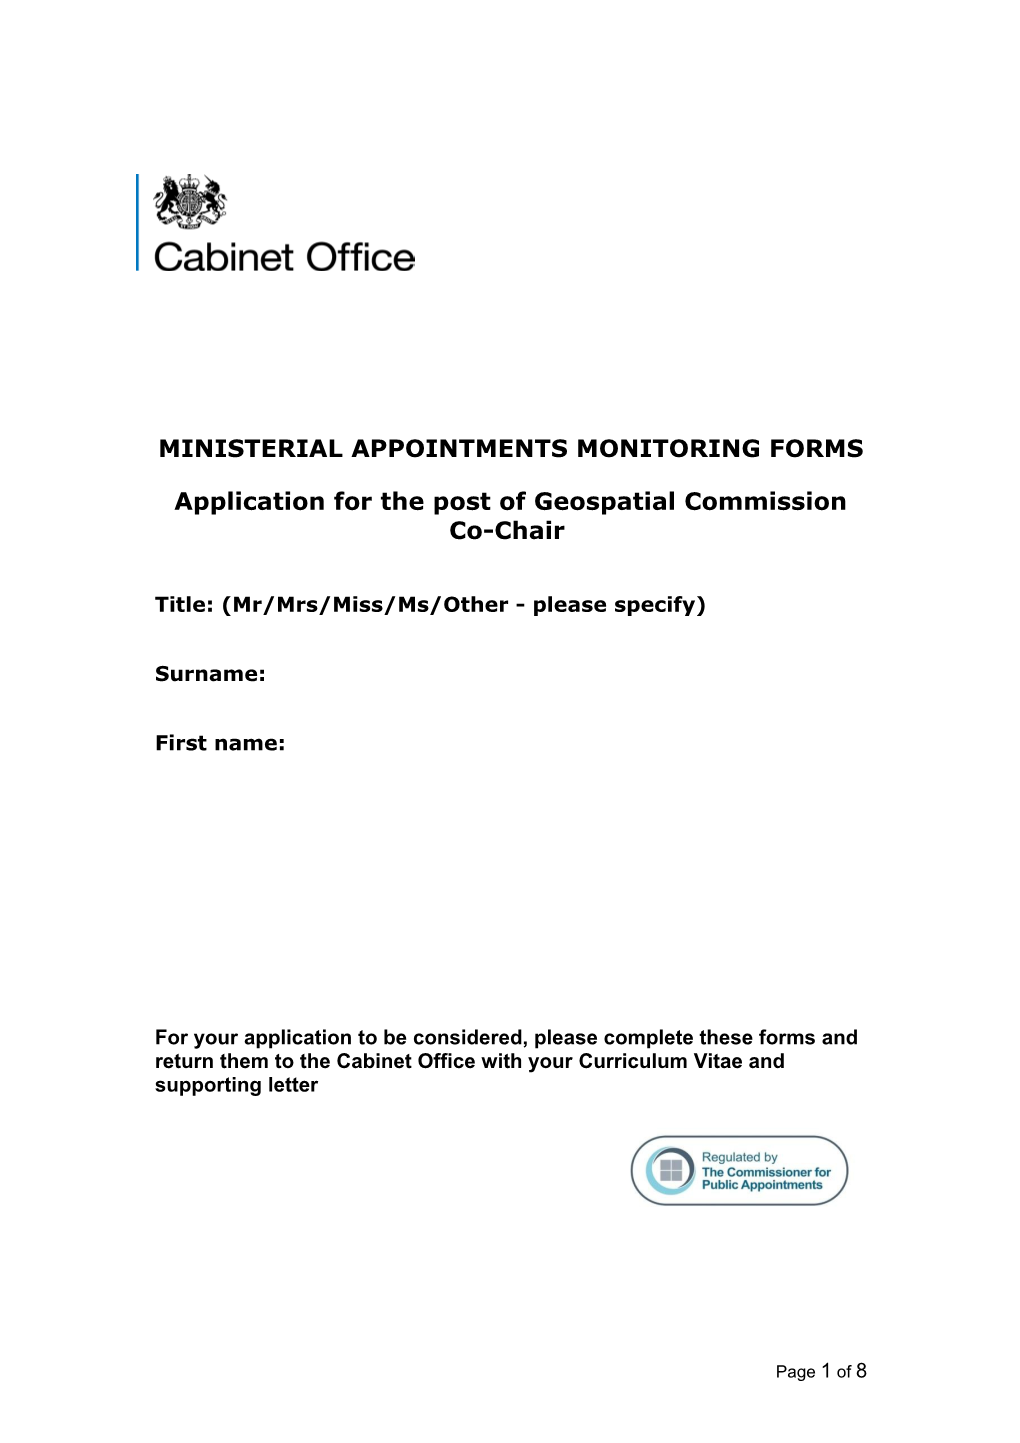 Ministerial Appointments Monitoring Forms